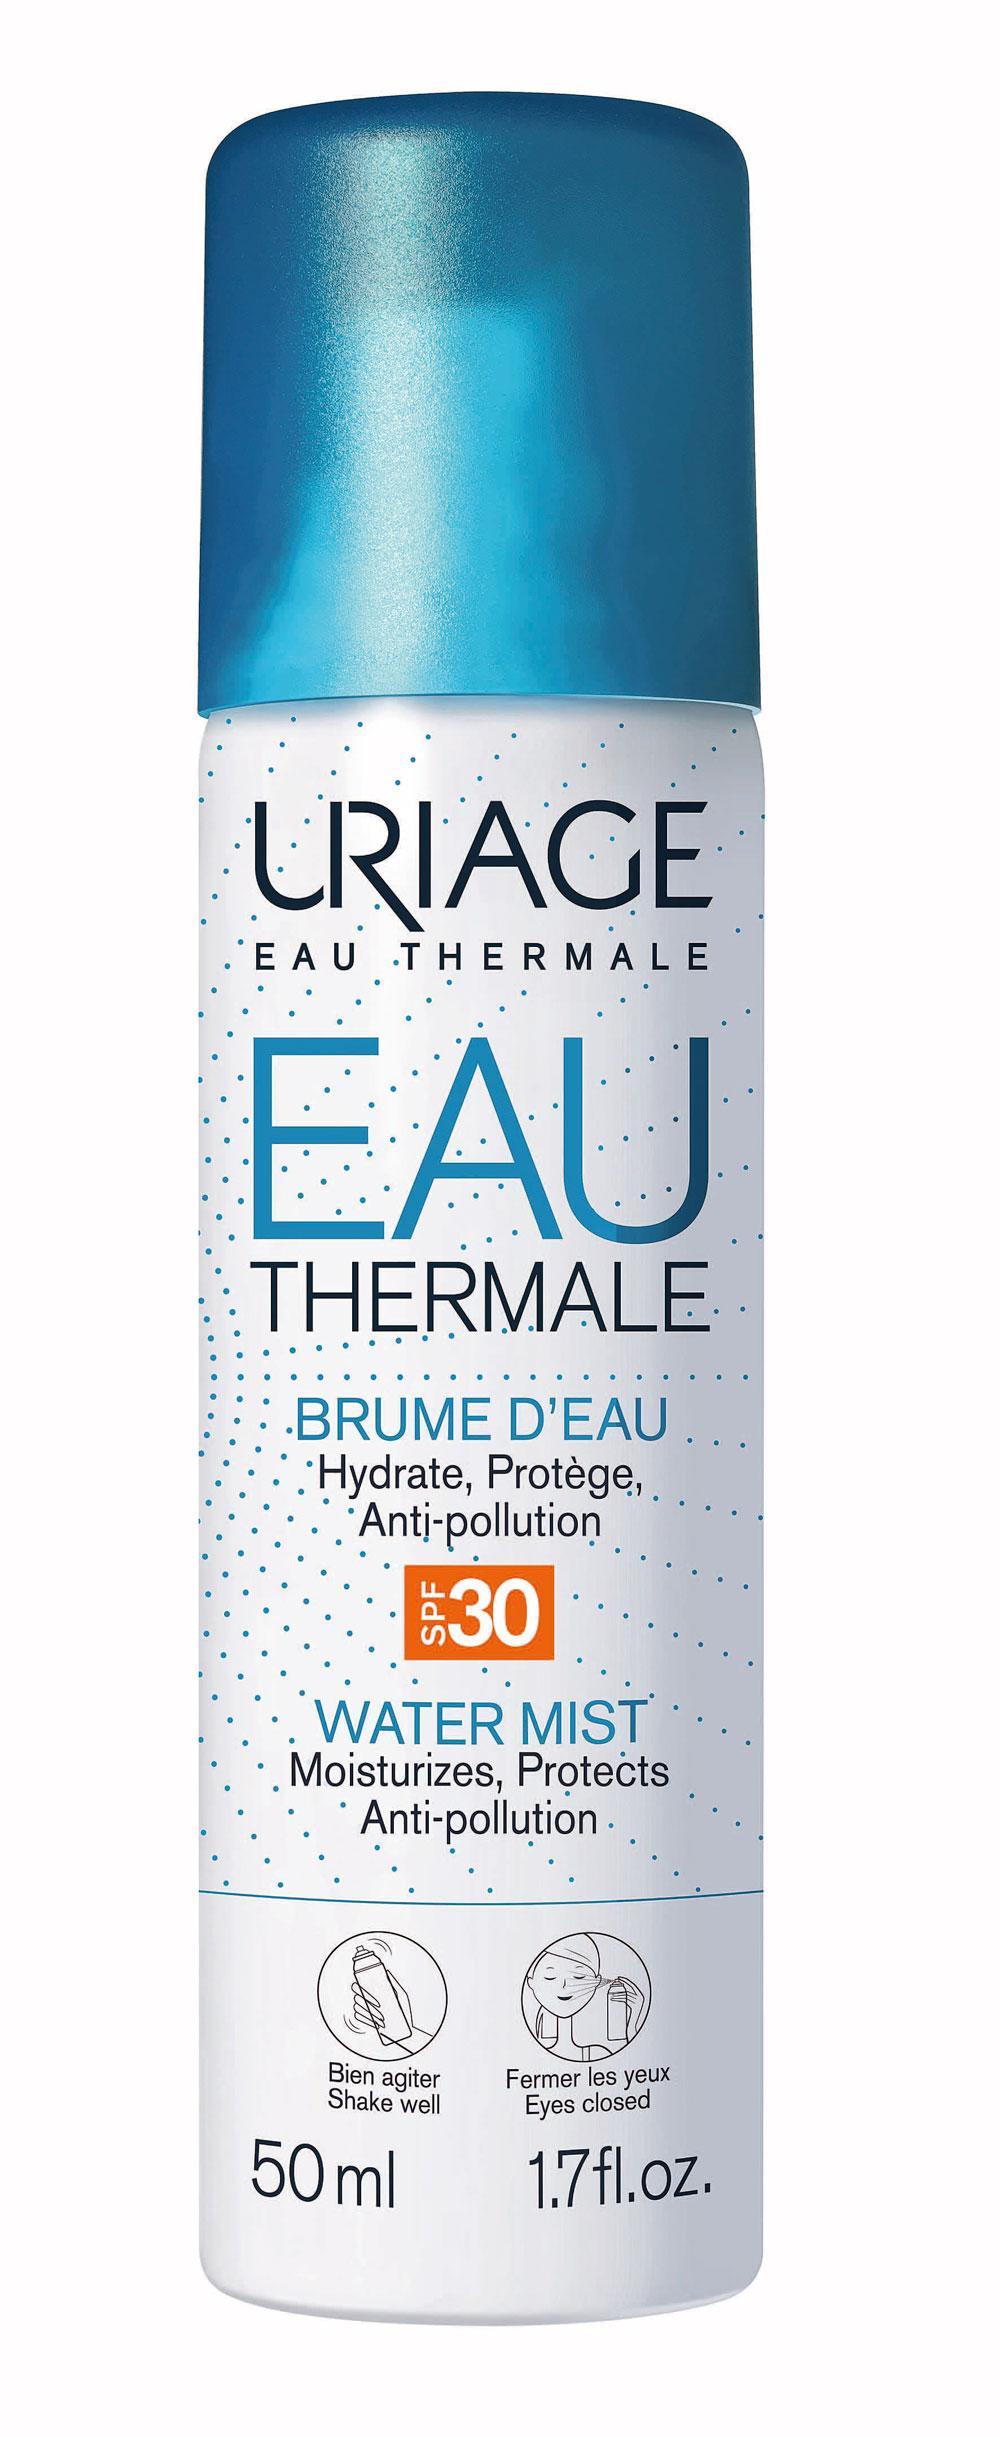 Eau Thermale Water Mist SPF30 (8,50 euro), Uriage.